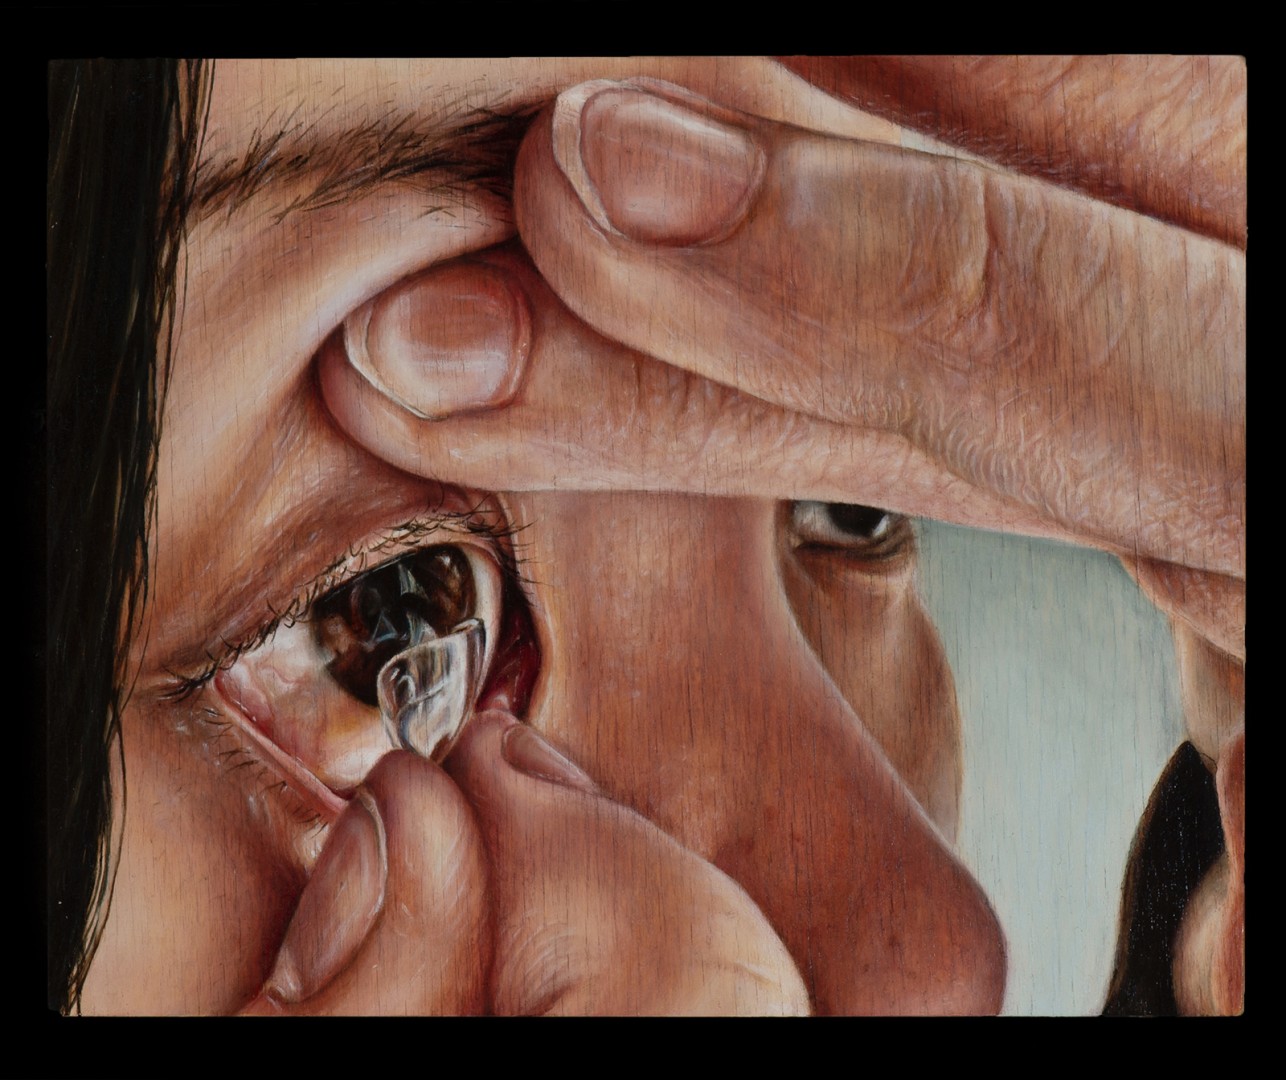 A painting of a person putting a contact in.